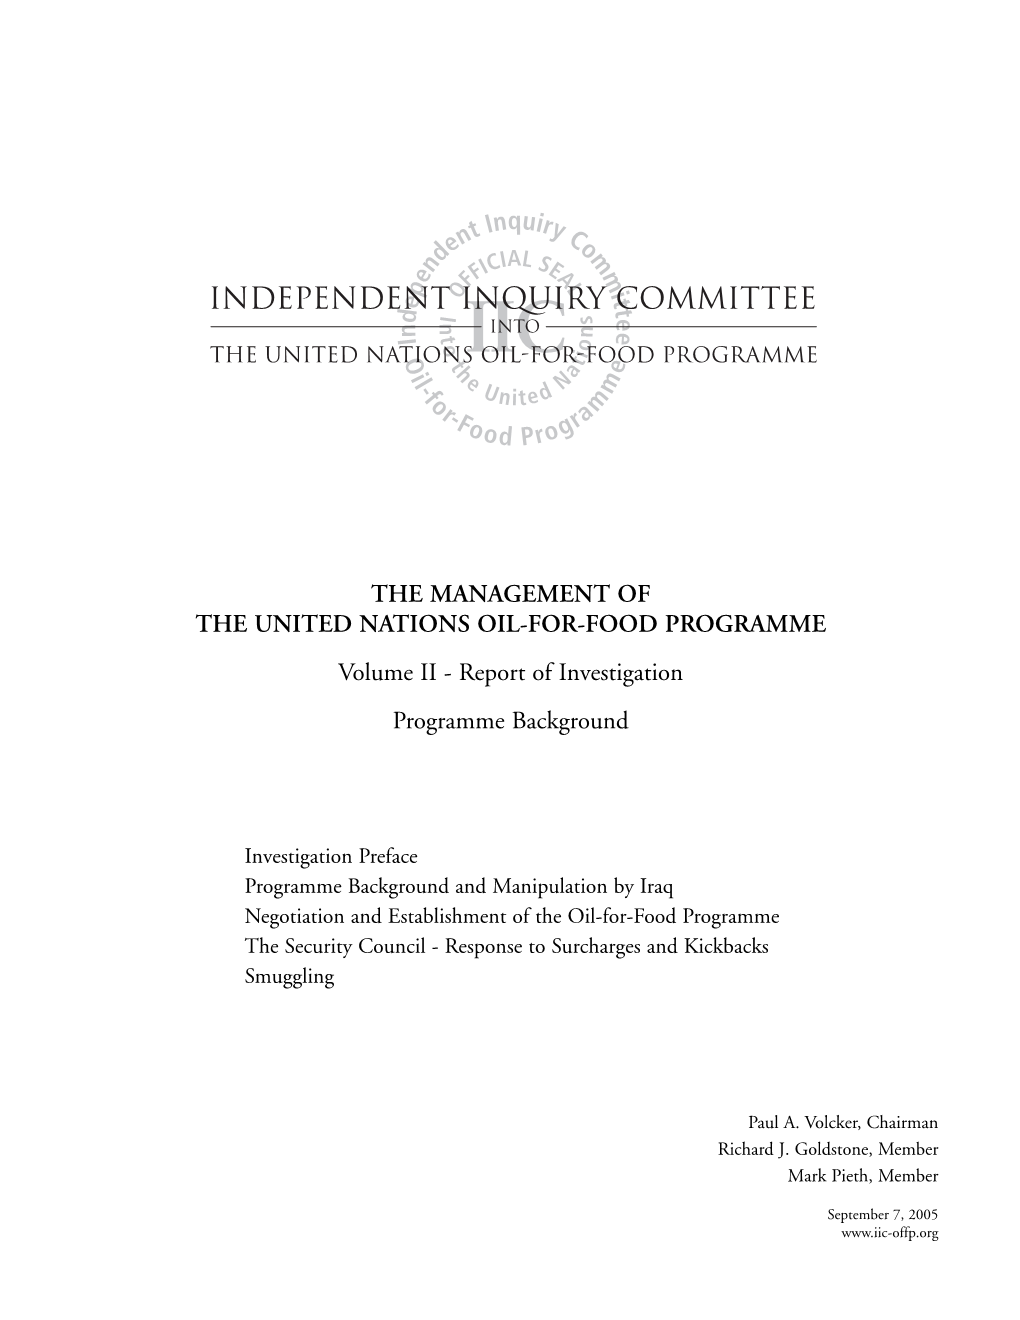 THE MANAGEMENT of the UNITED NATIONS OIL-FOR-FOOD PROGRAMME Volume II - Report of Investigation Programme Background